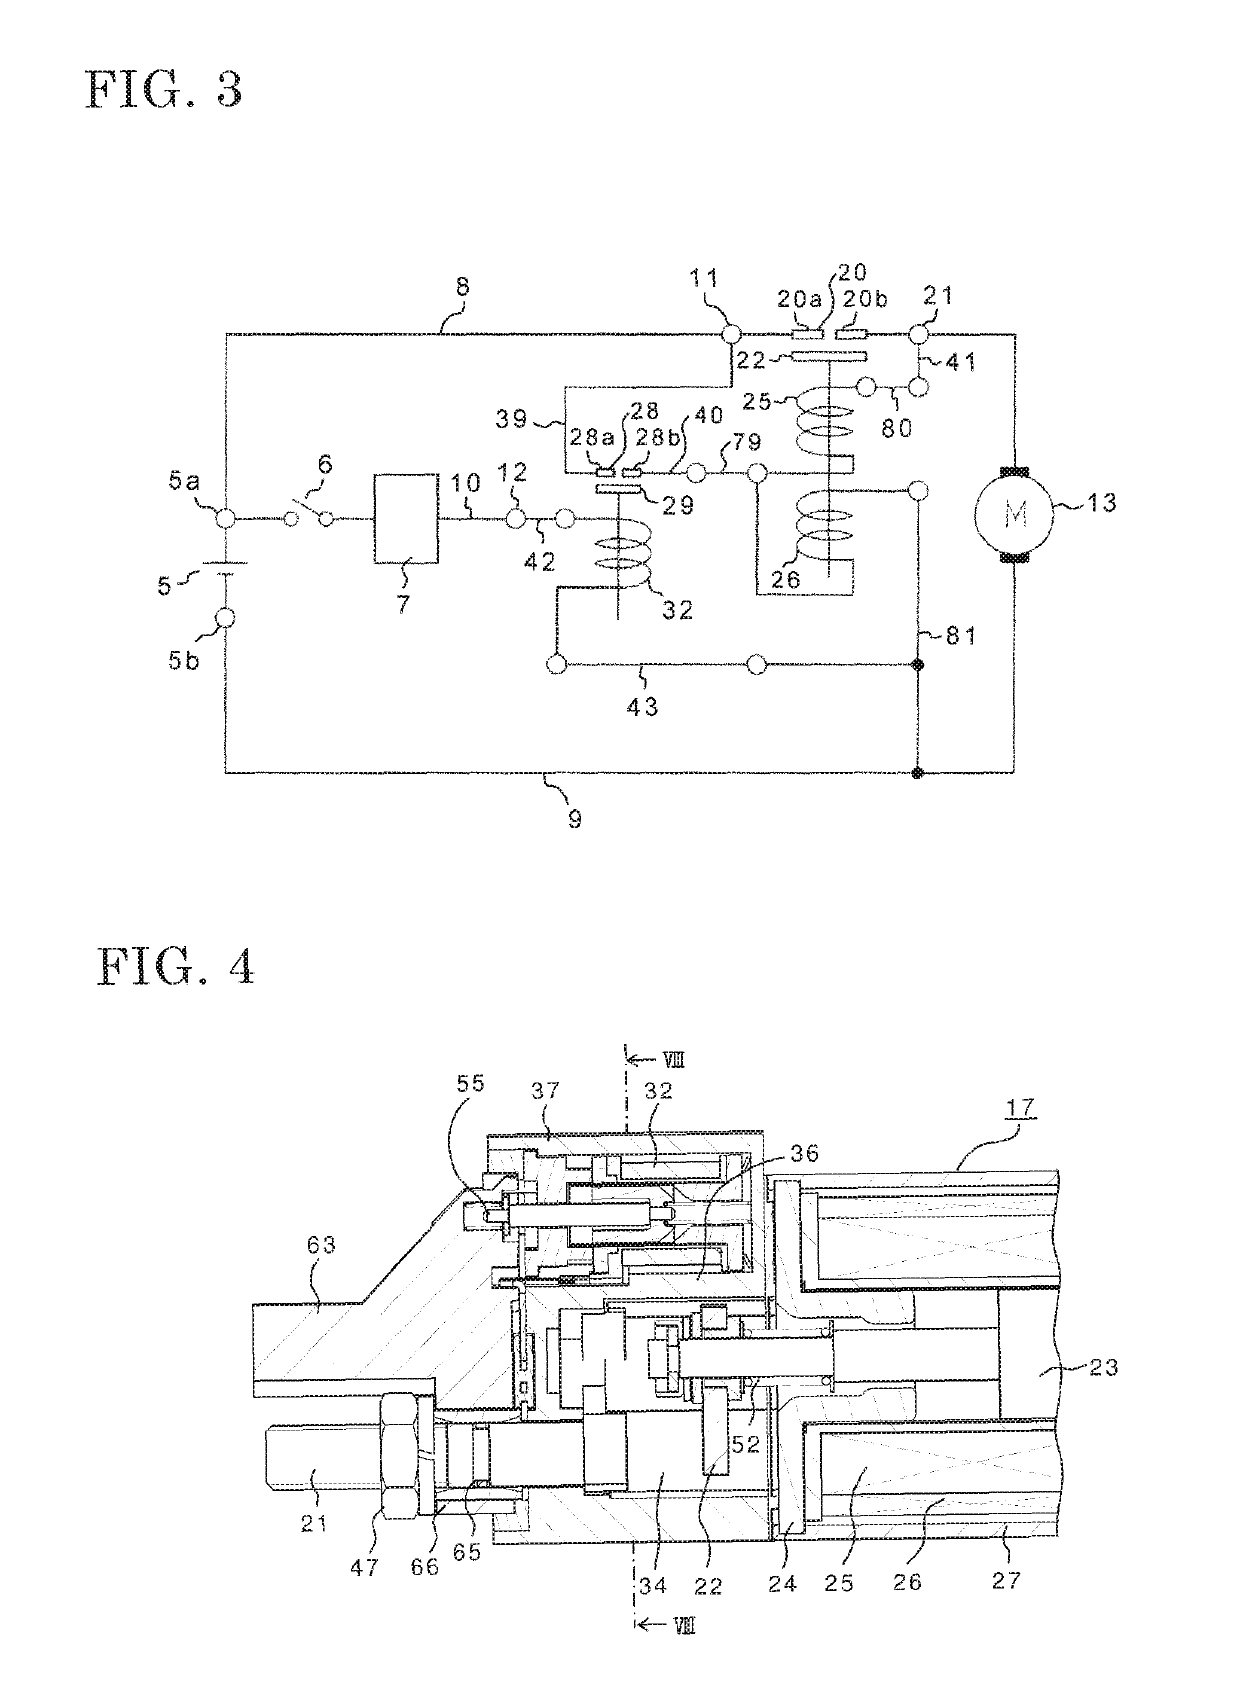 Electromagnetic switch device for starter